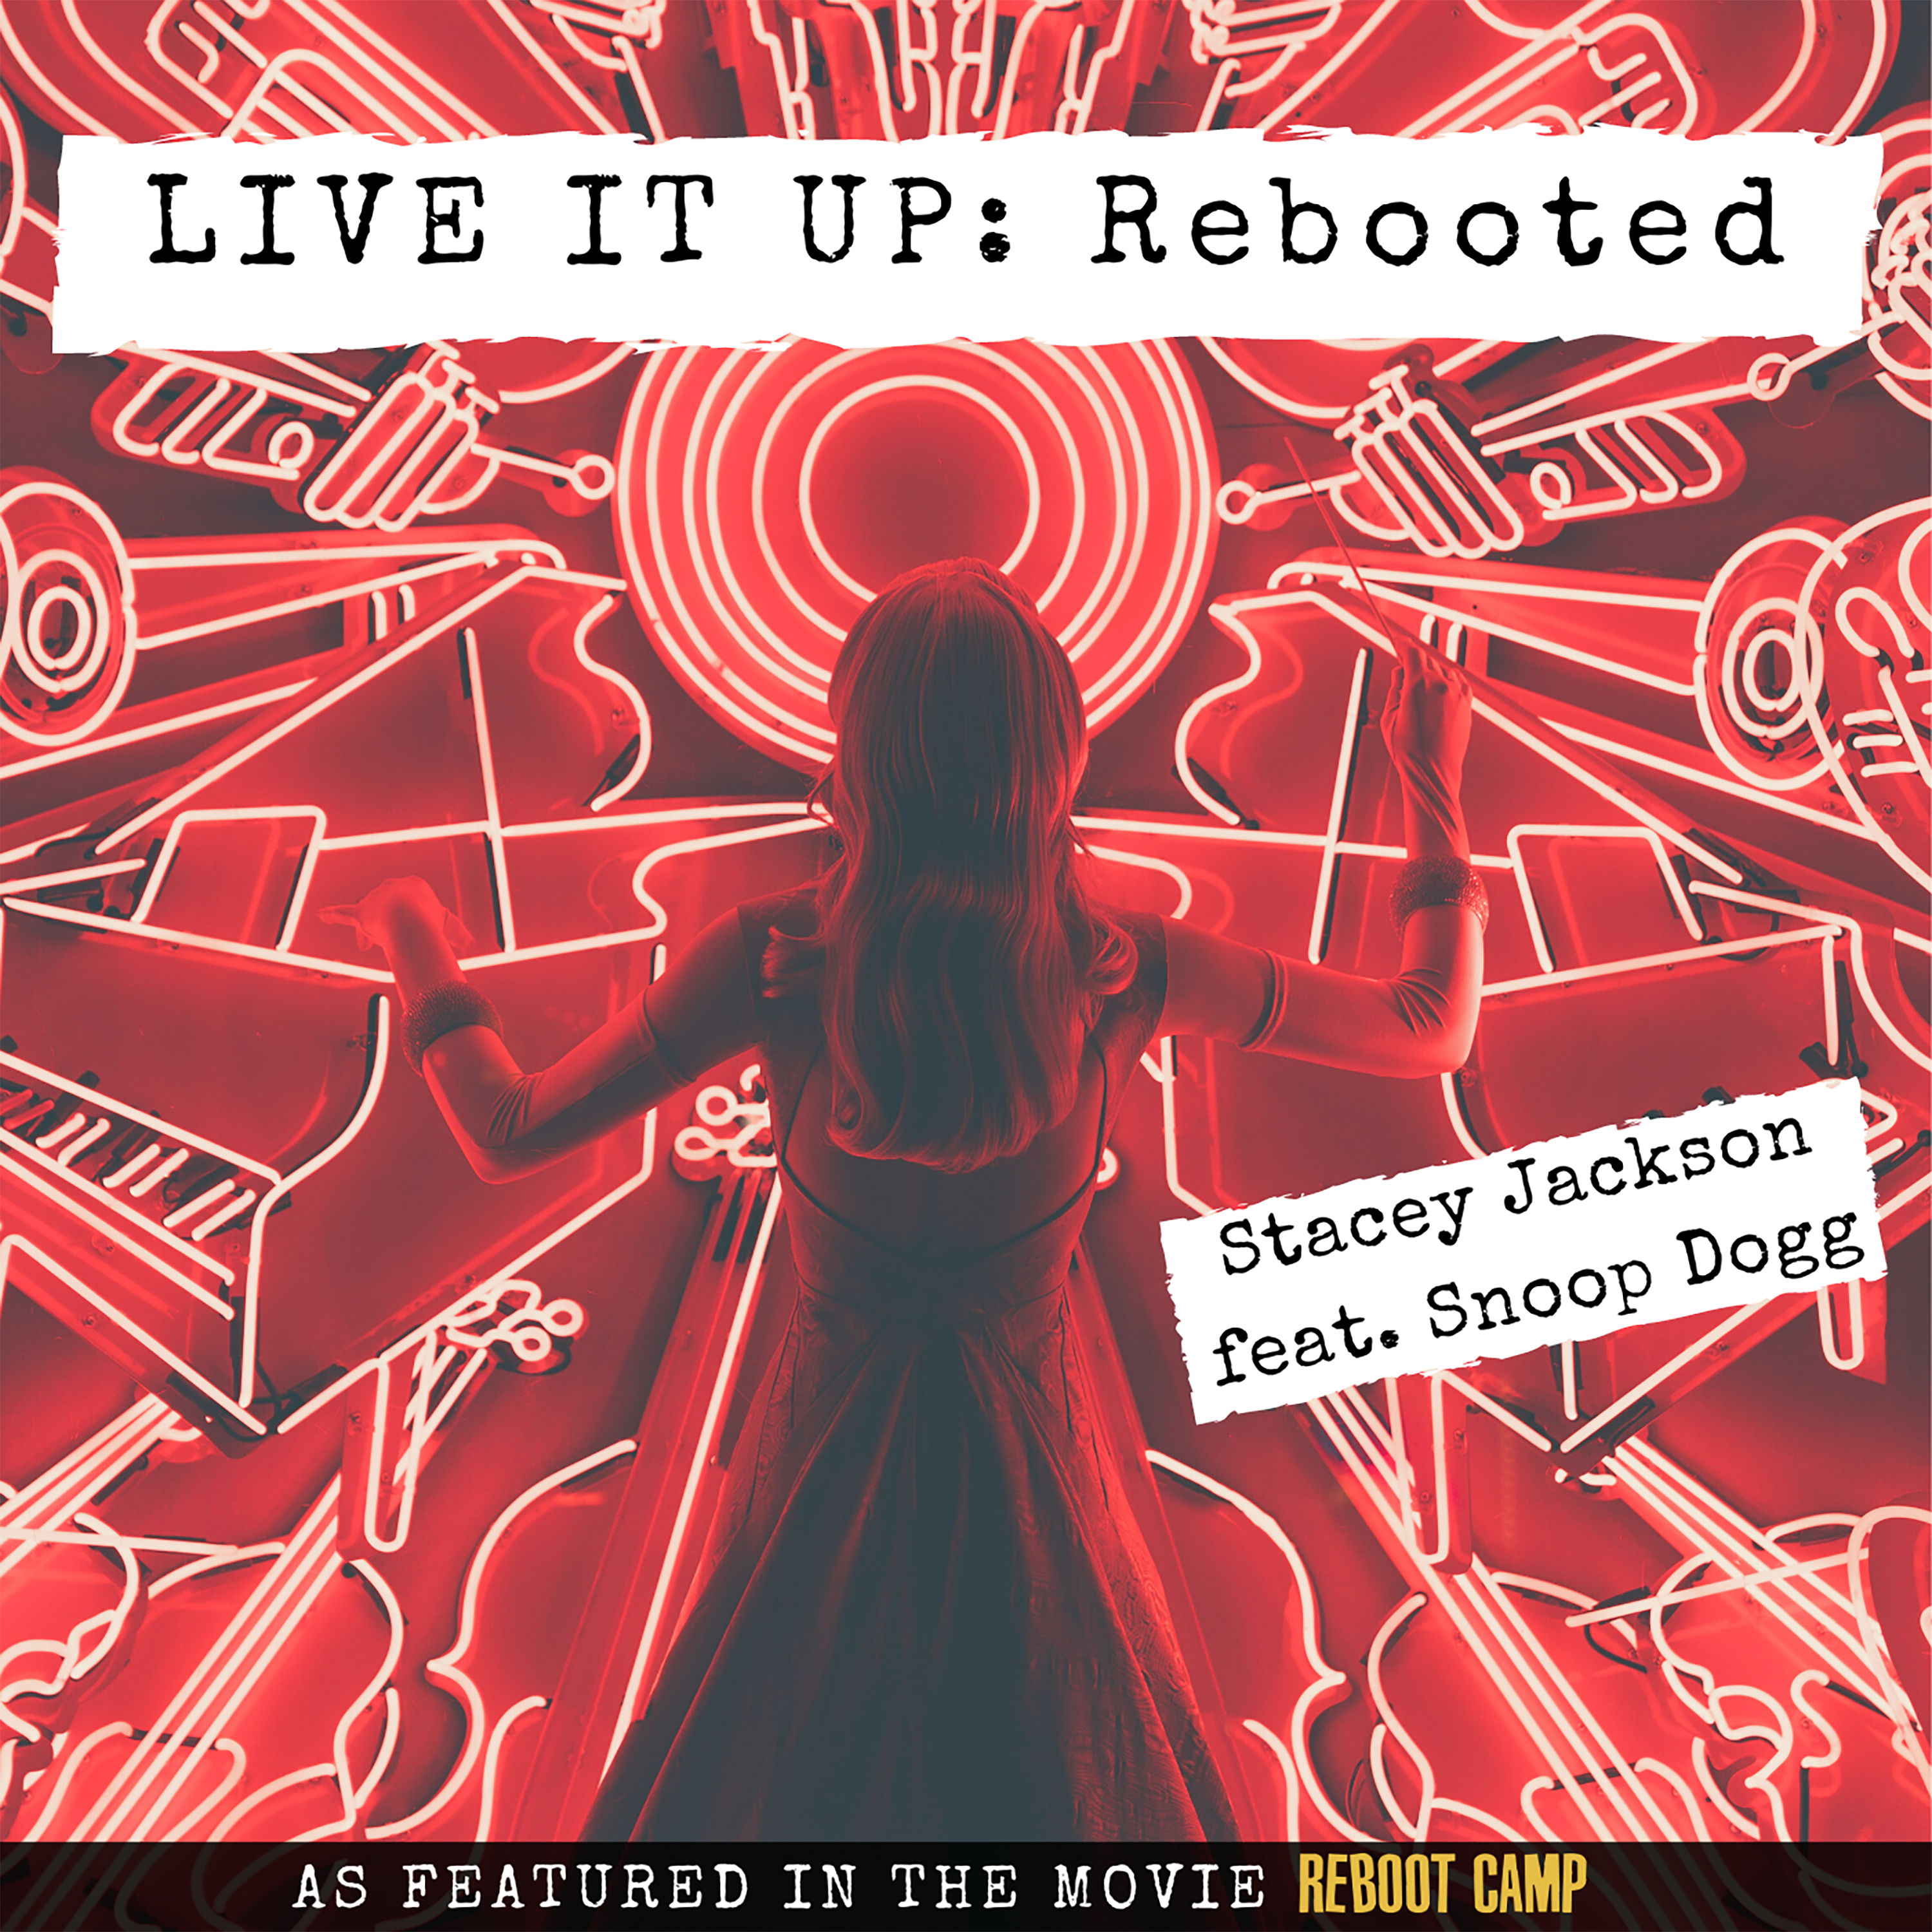 Stacey Jackson ft Snoop Dogg - Live It Up (Rebooted)